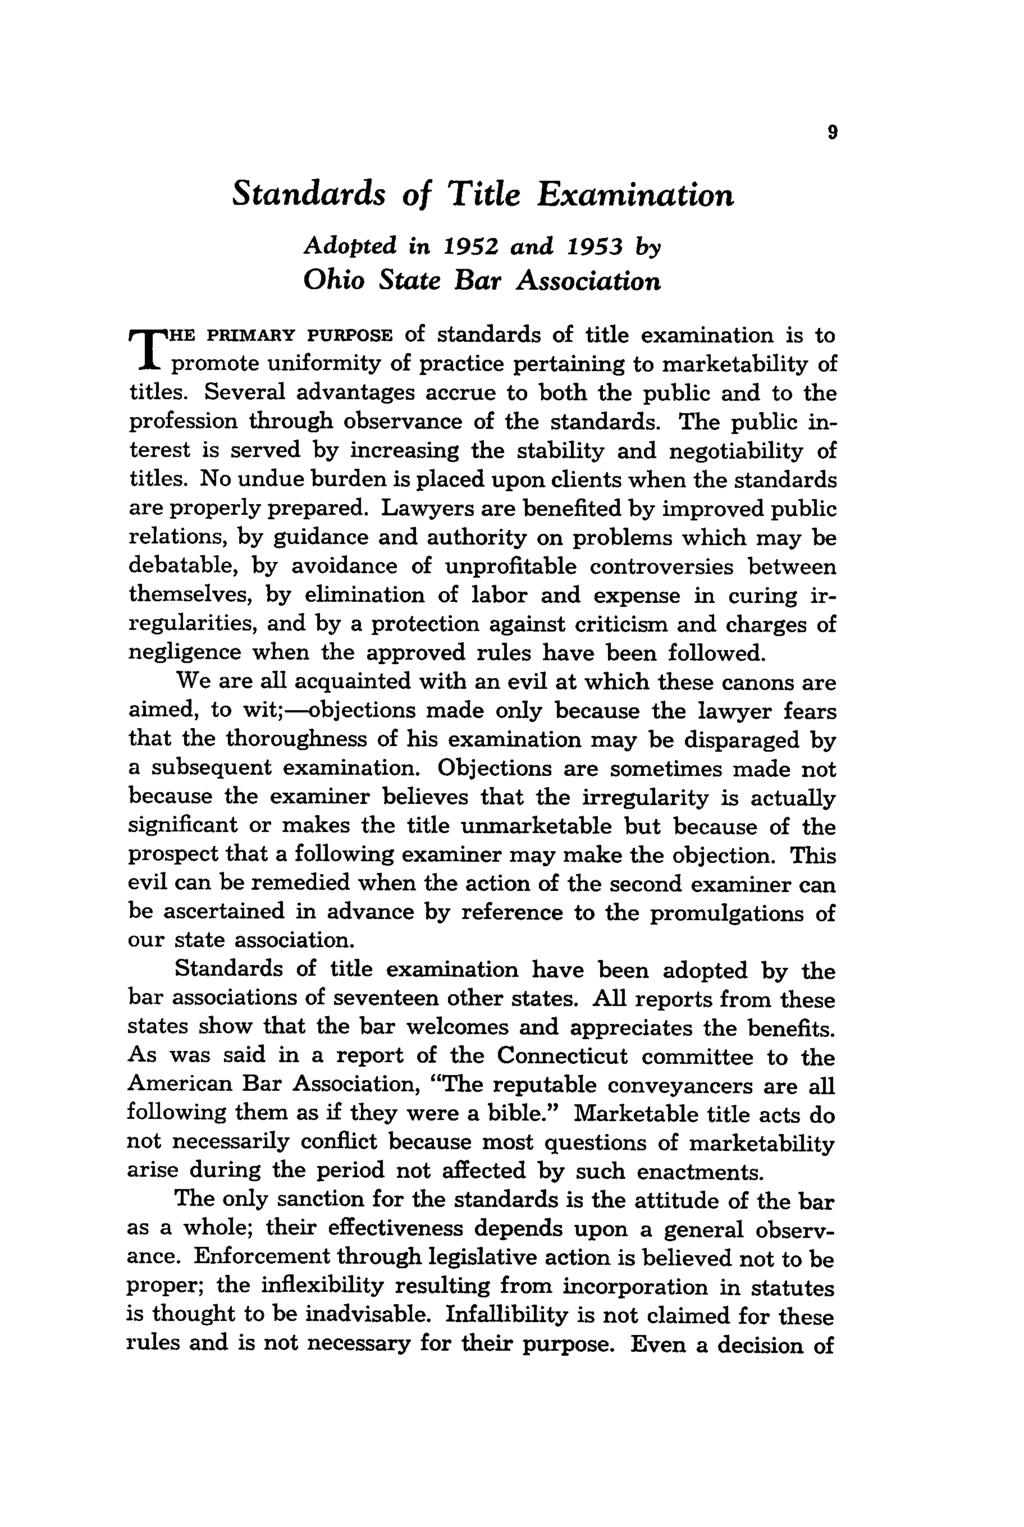 T Standards of Title Examination Adopted in 1952 and 1953 by Ohio State Bar Association HE PRIMARY PURPOSE of standards of title examination is to promote uniformity of practice pertaining to